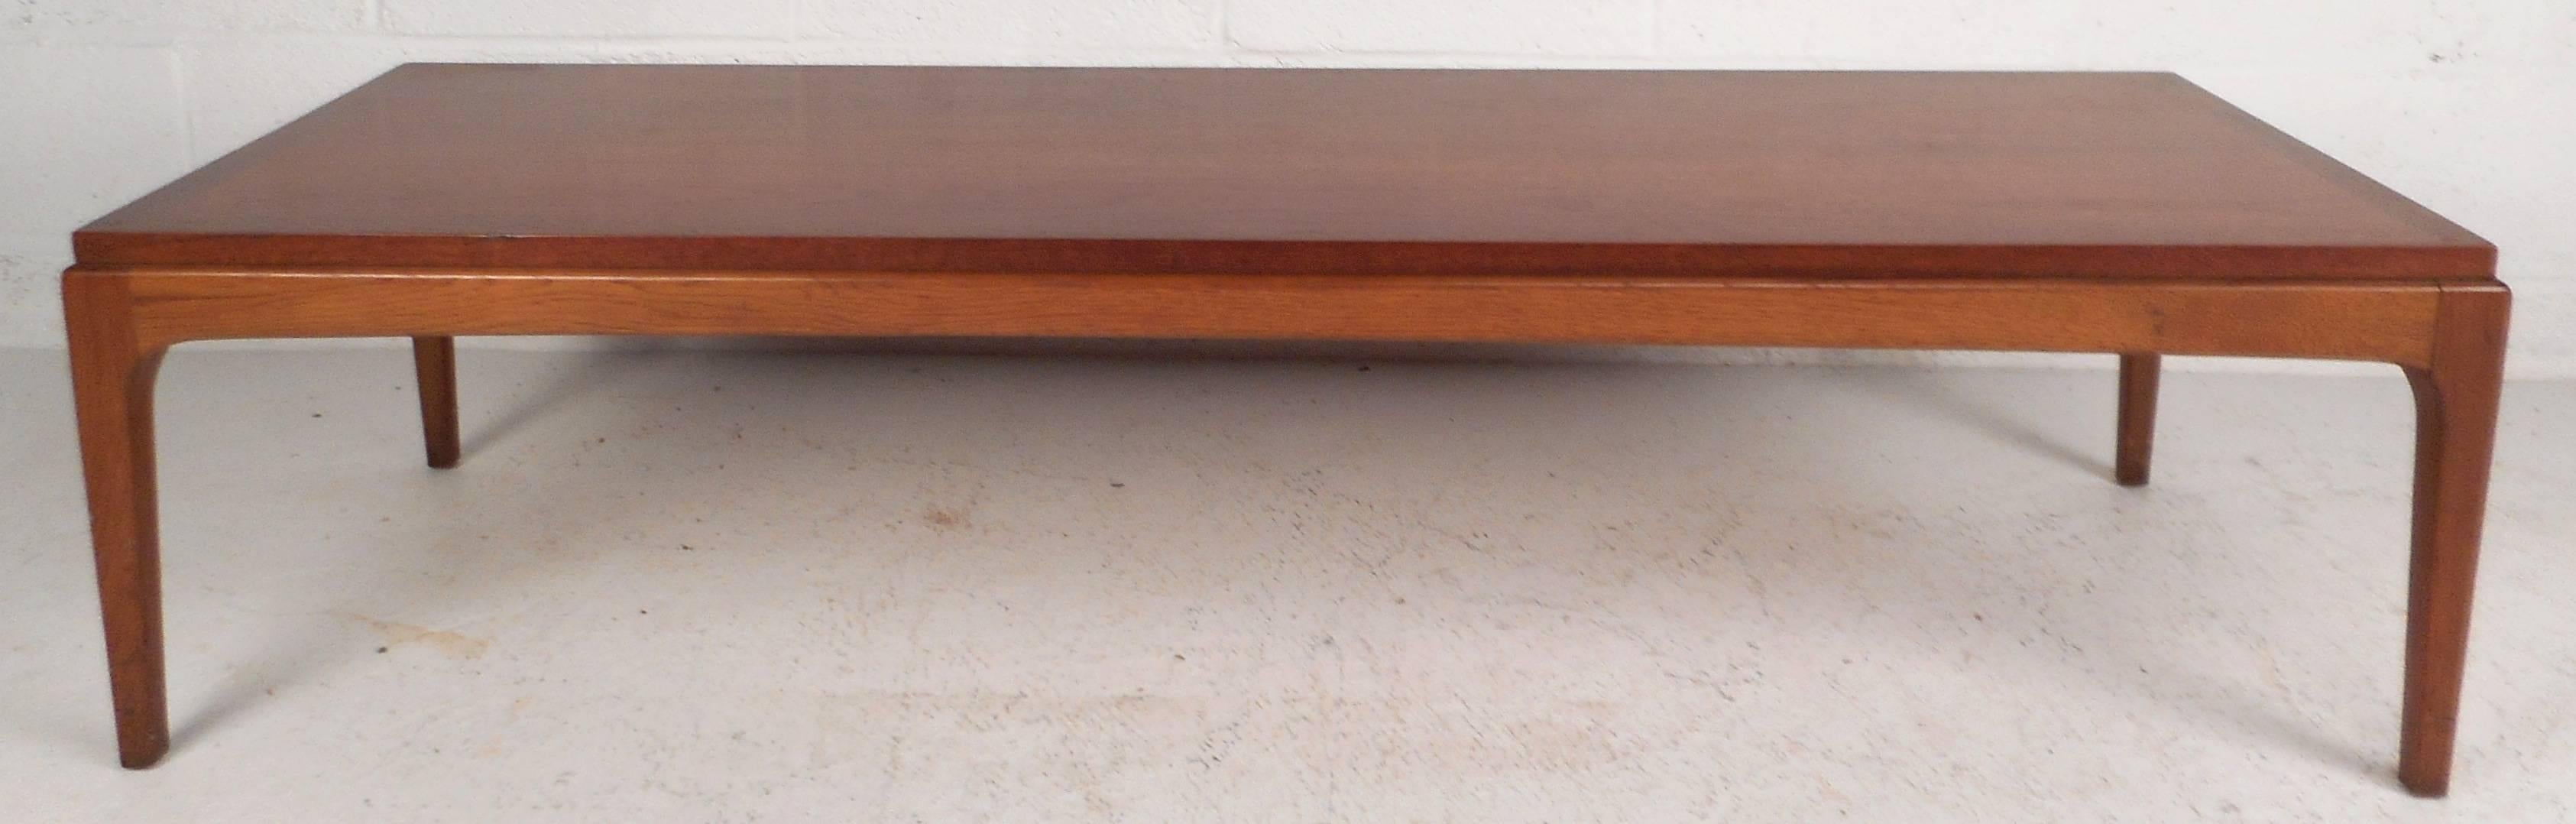 Gorgeous vintage modern coffee table with unique raised top and four sturdy legs. The makers mark and serial number on the bottom ensuring quality craftsmanship. Elegant walnut wood grain and clean lines add style and grace to any modern interior.